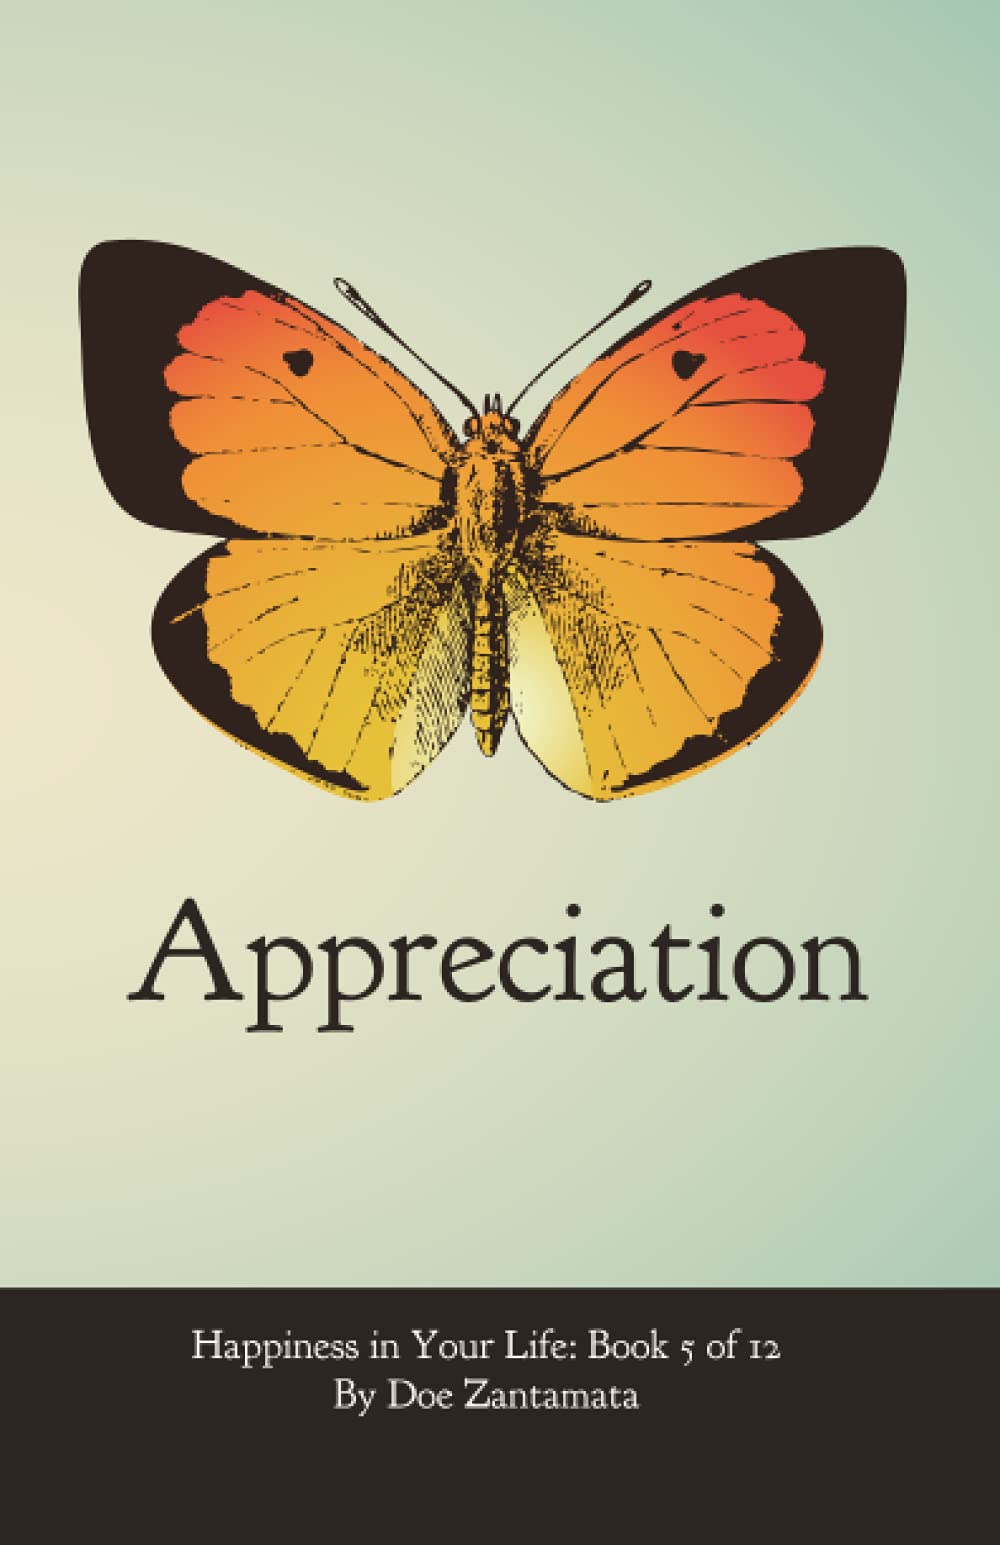 Happiness in Your Life - Book Five: Appreciation